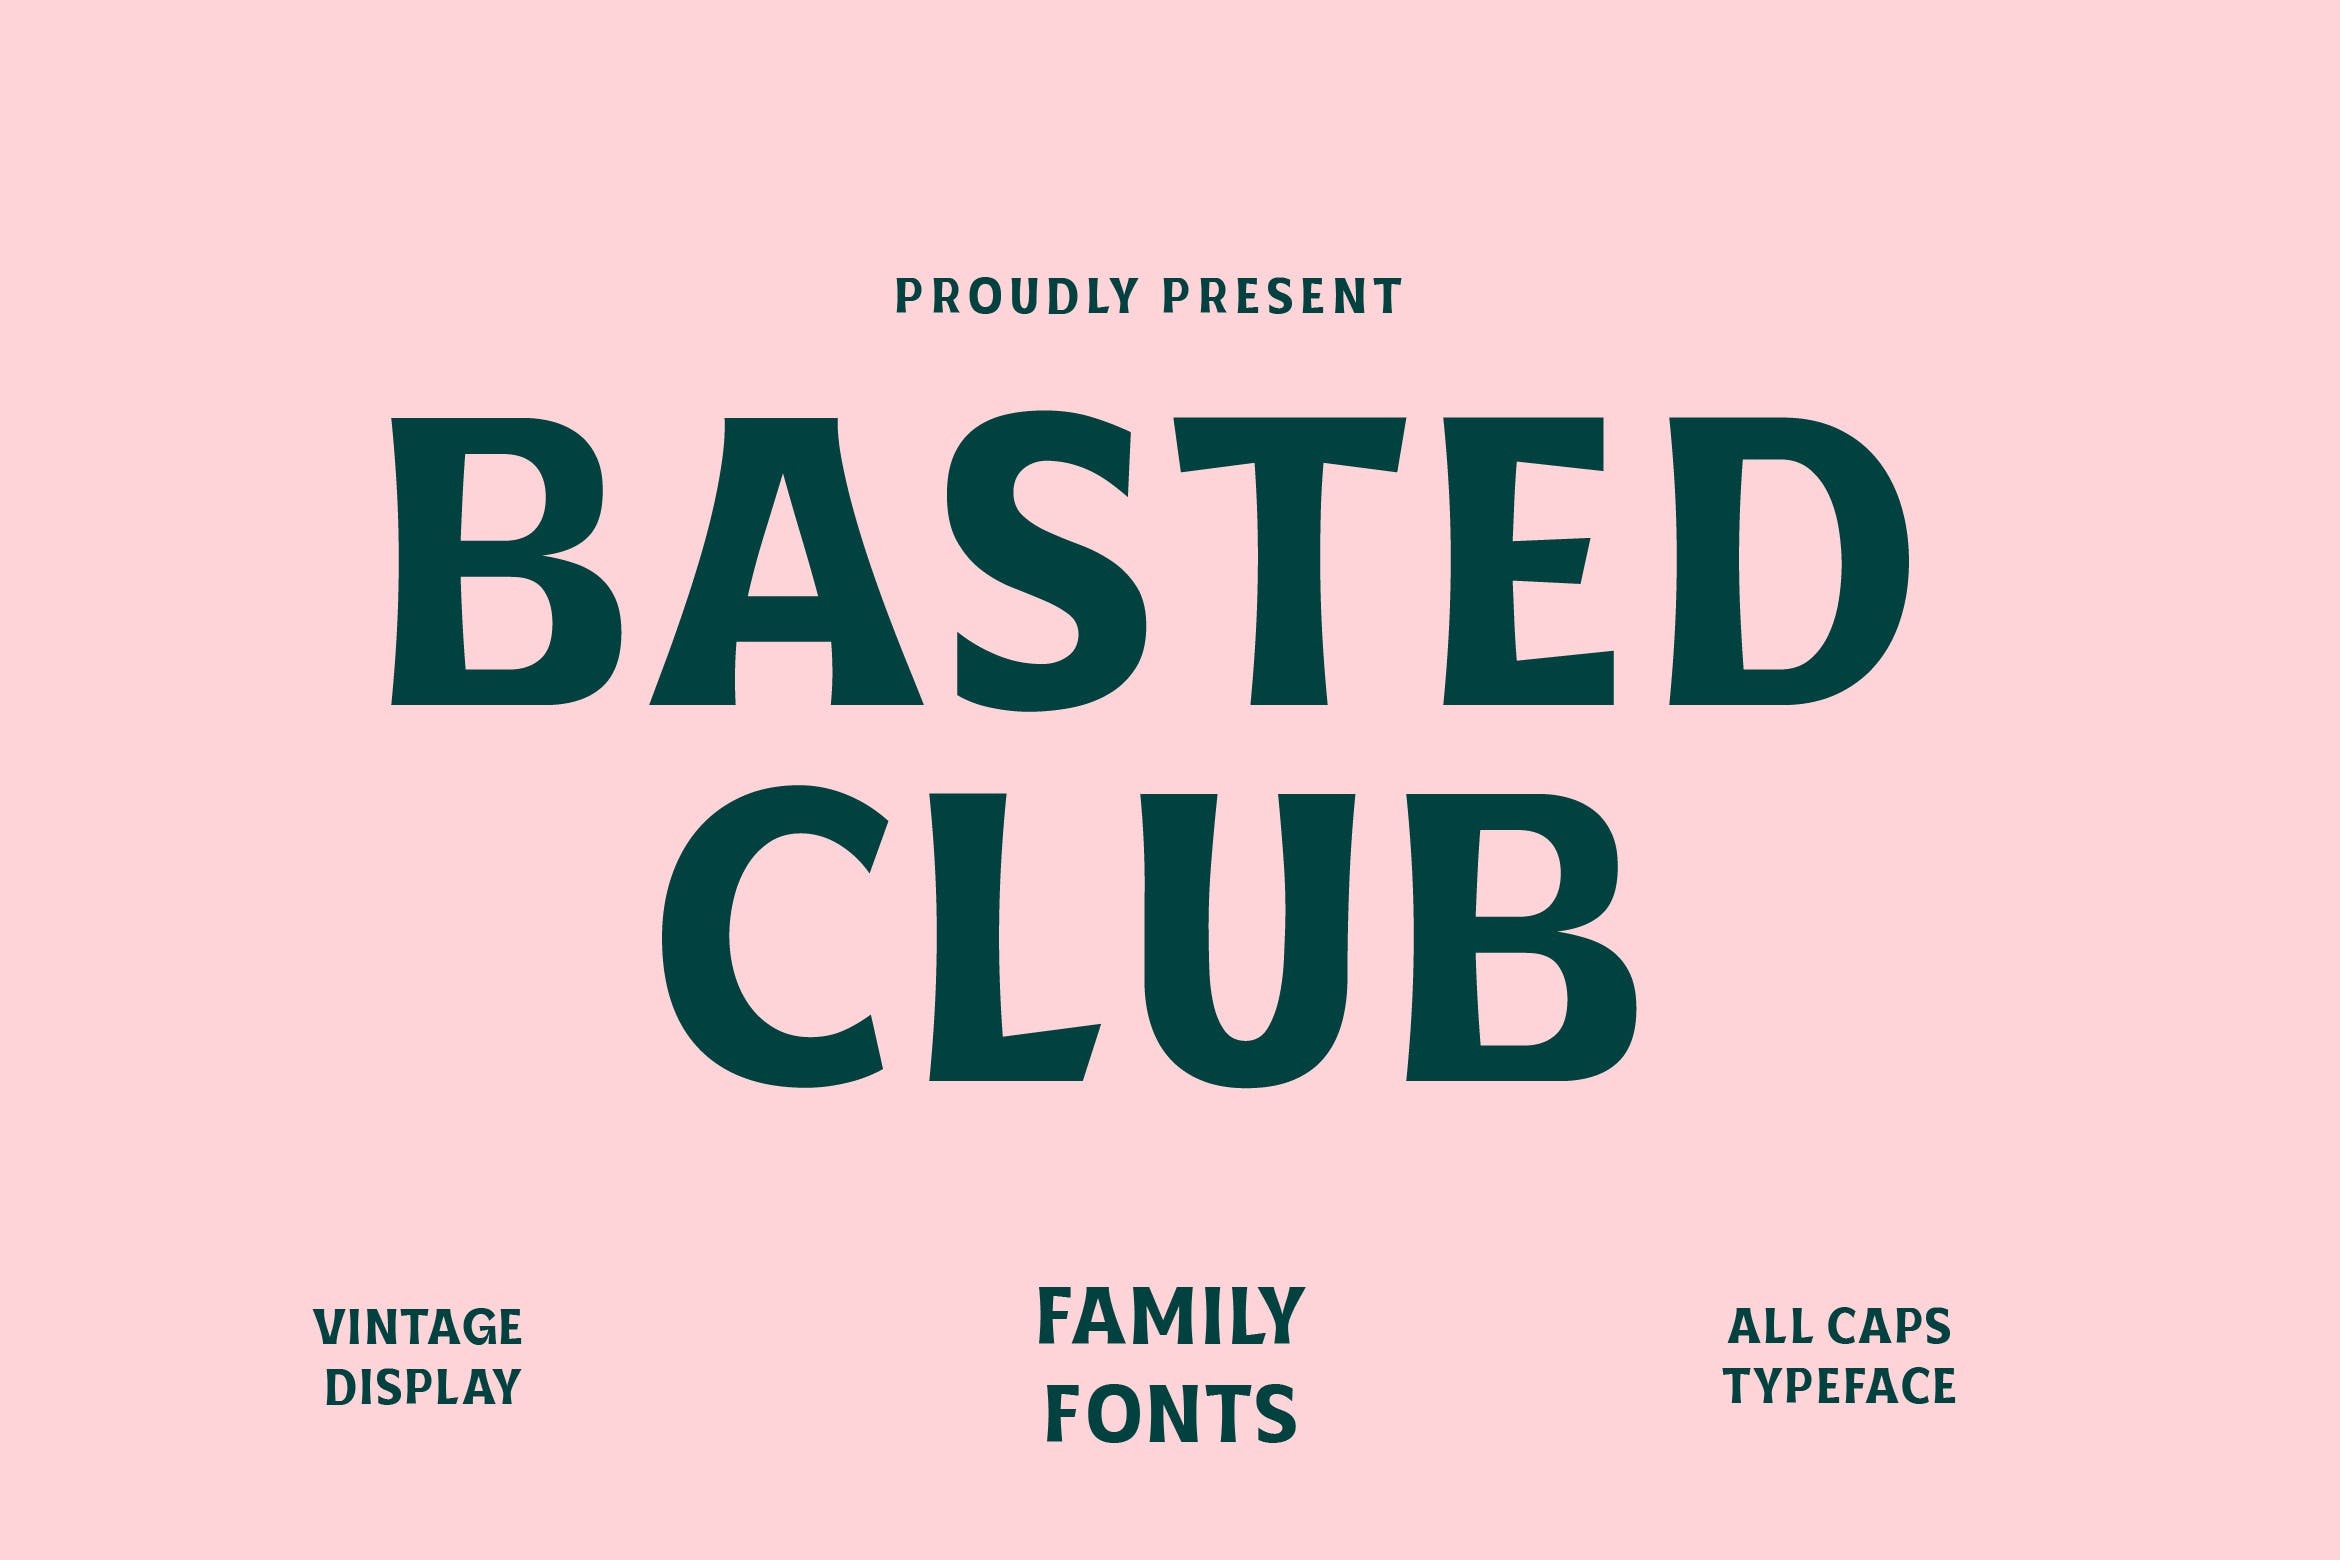 Basted Clubs